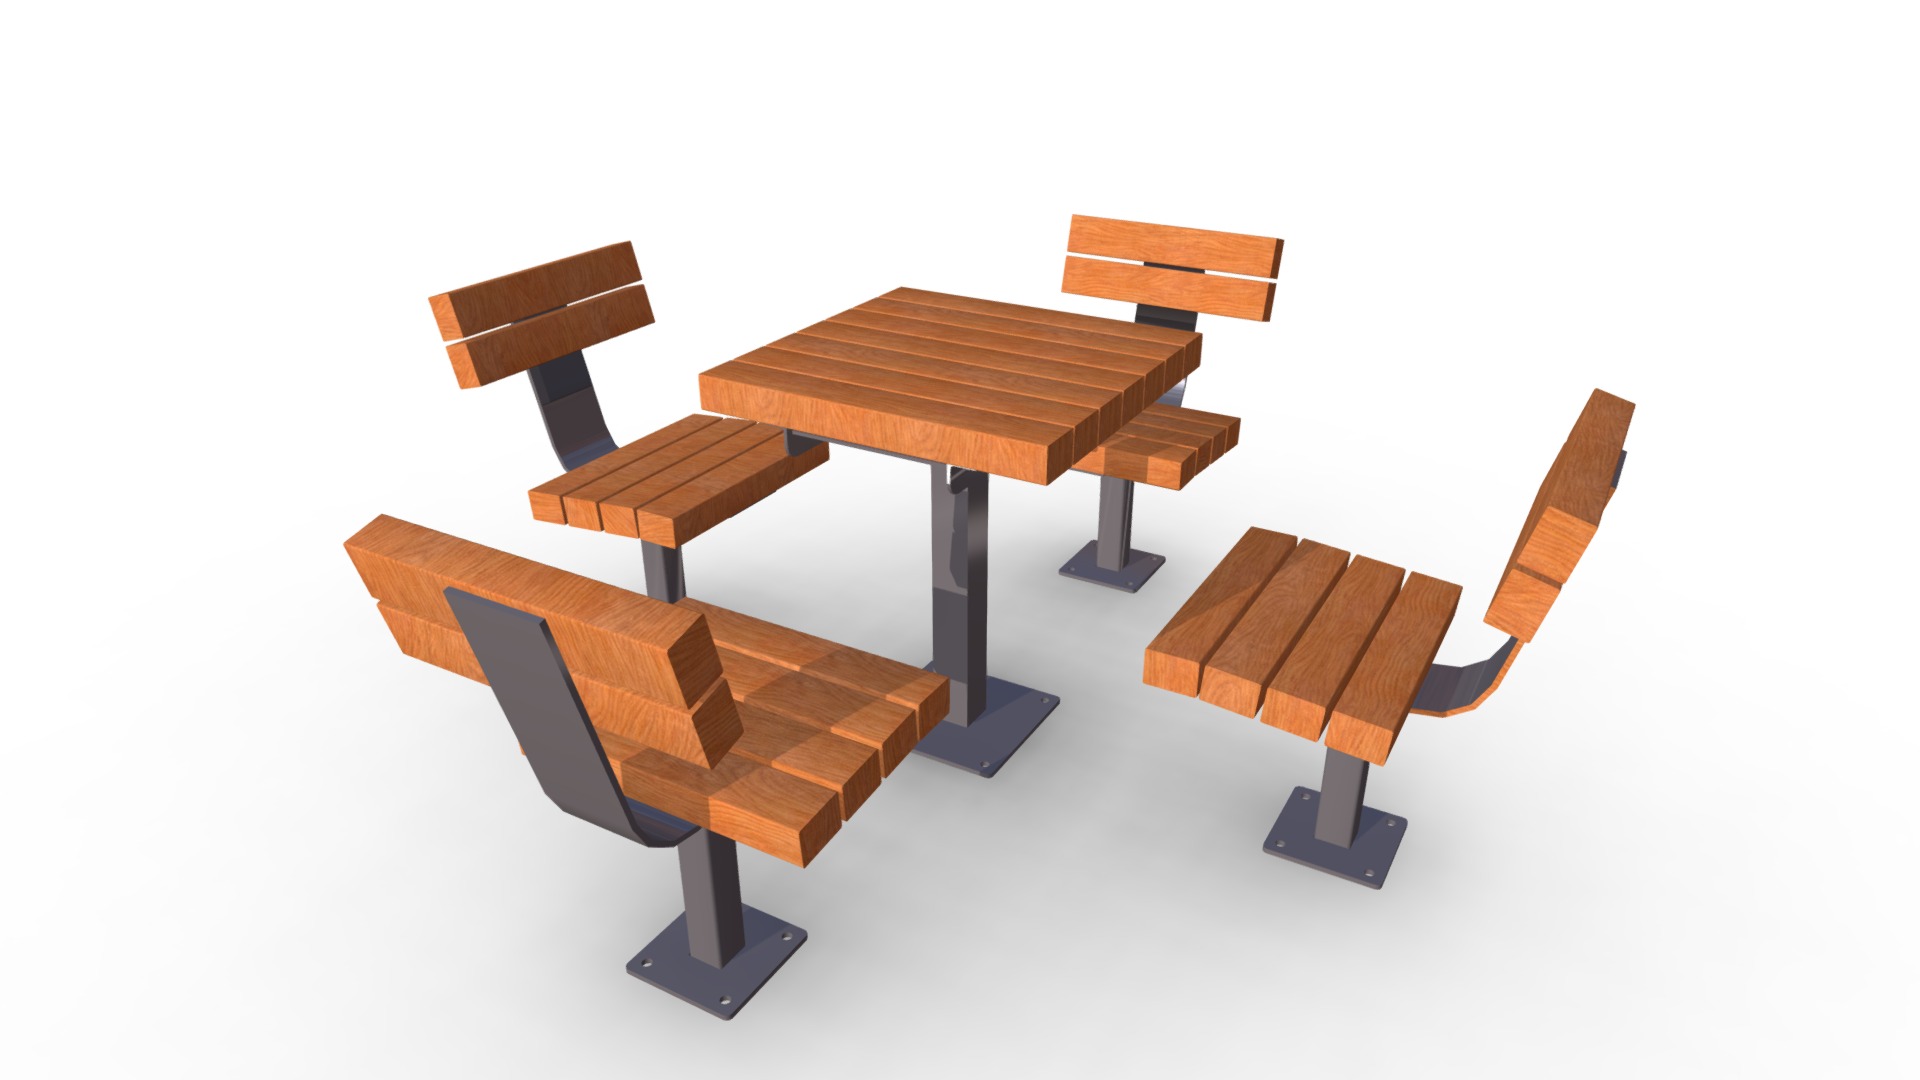 3D model GK-03 - This is a 3D model of the GK-03. The 3D model is about a table with chairs around it.